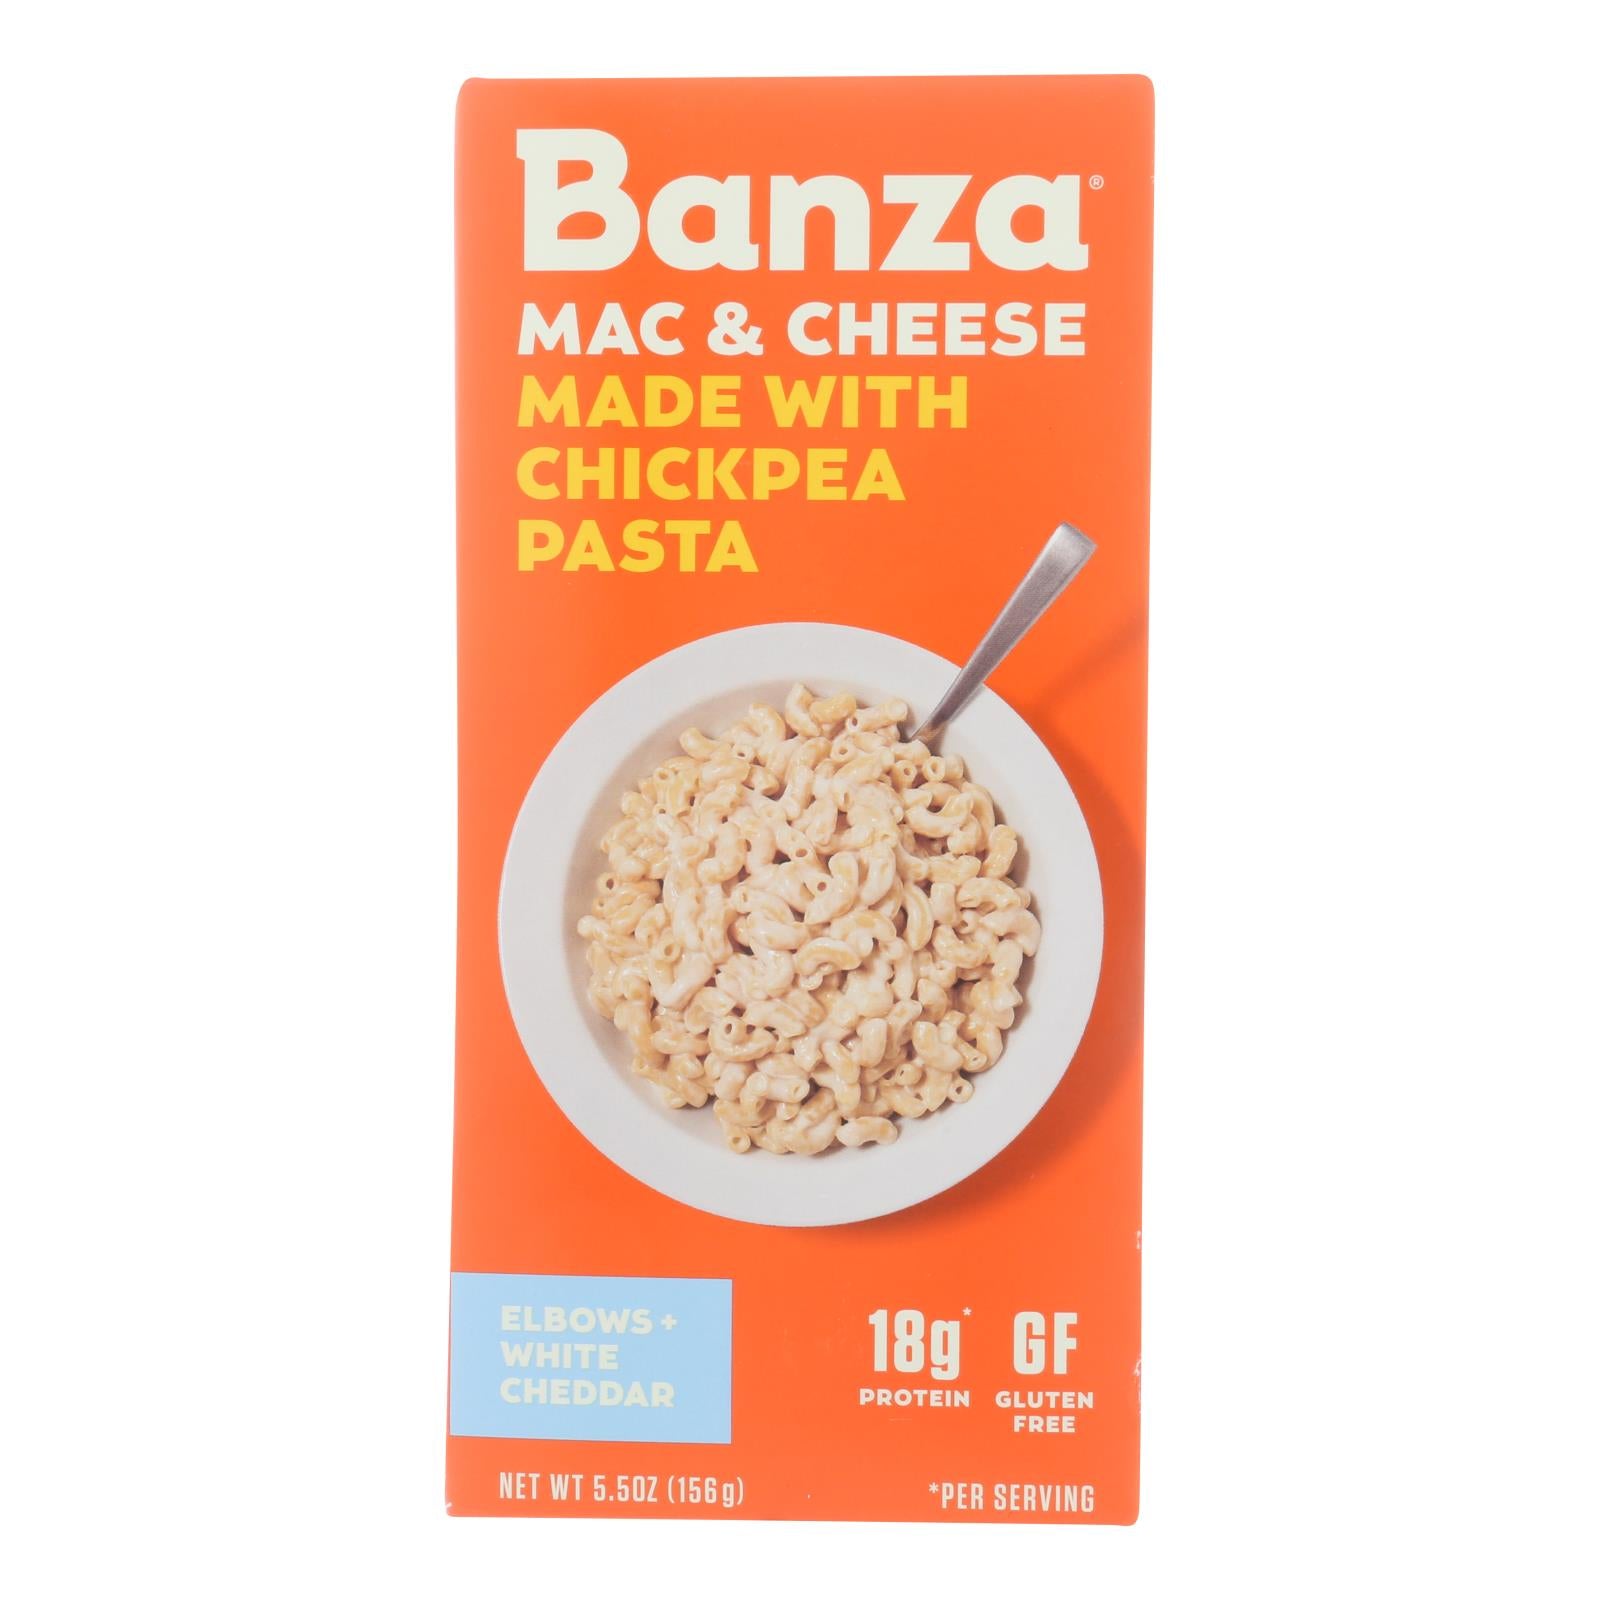 Banza, Banza - Chickpea Pasta Mac and Cheese - White Cheddar - Case of 6 - 5.5 oz. (Pack of 6)